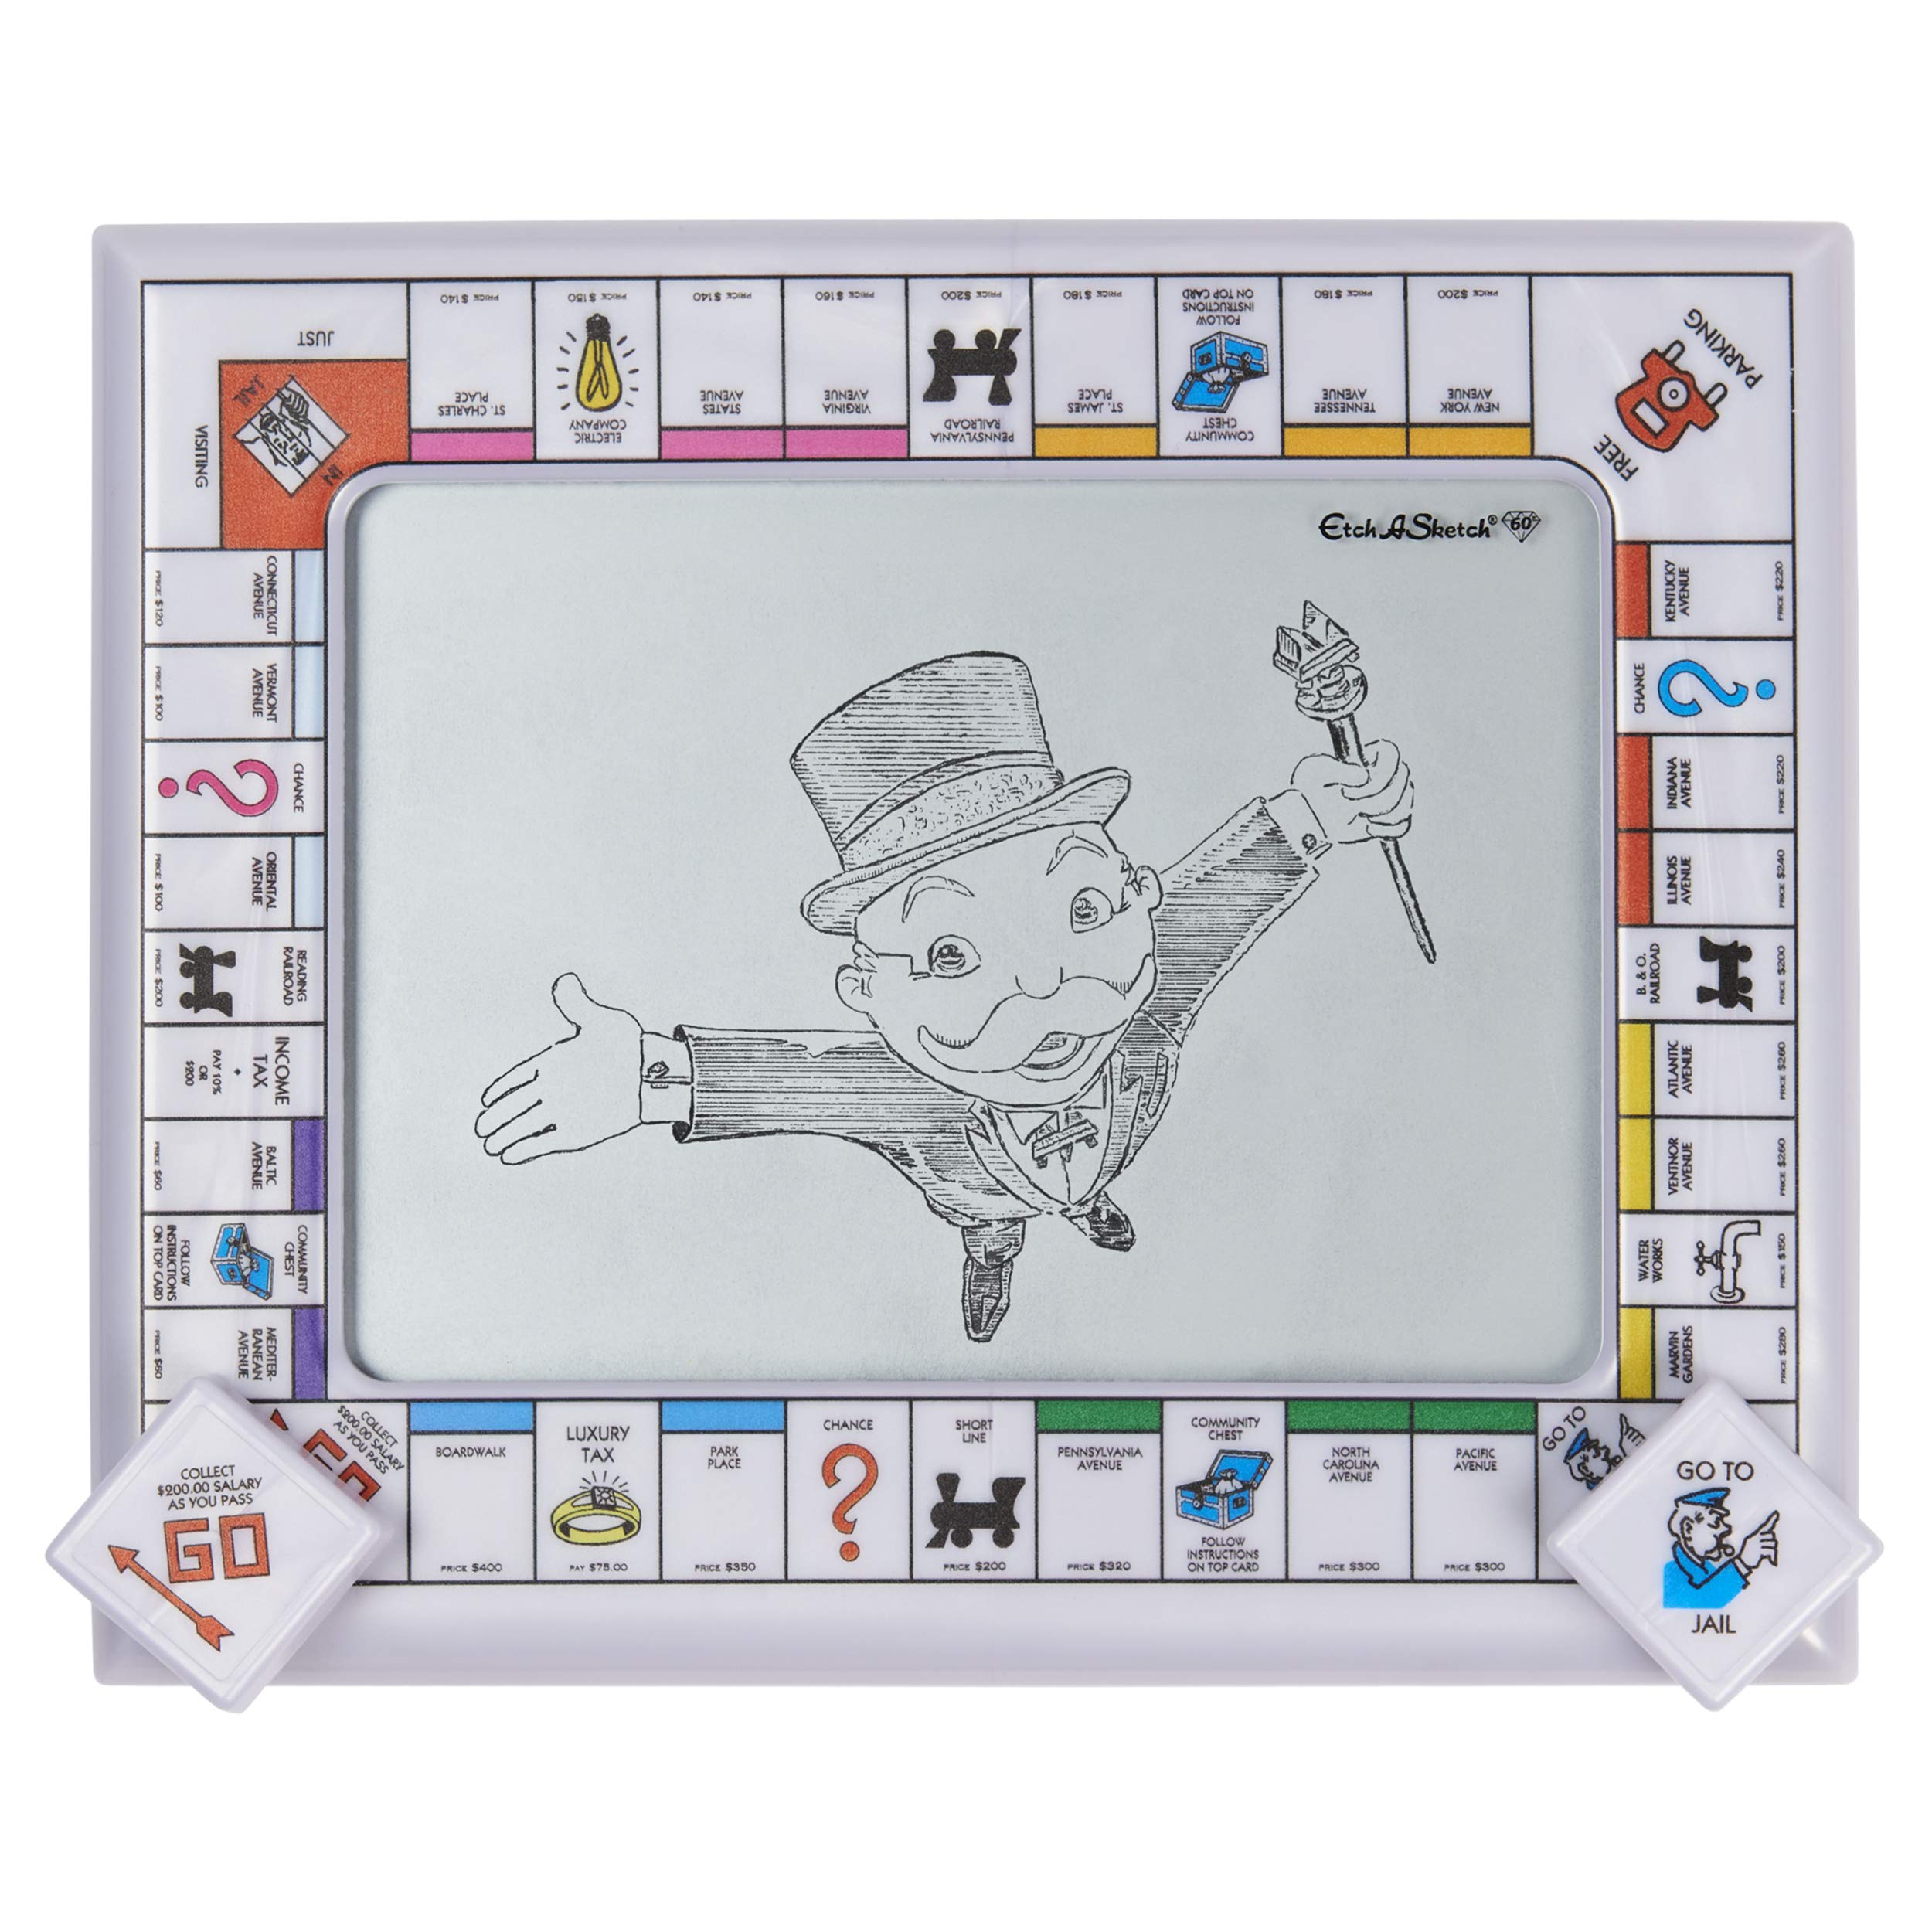 Etch A Sketch Classic, Monopoly Limited-Edition Drawing Toy with Magic Screen, for Ages 3 and Up